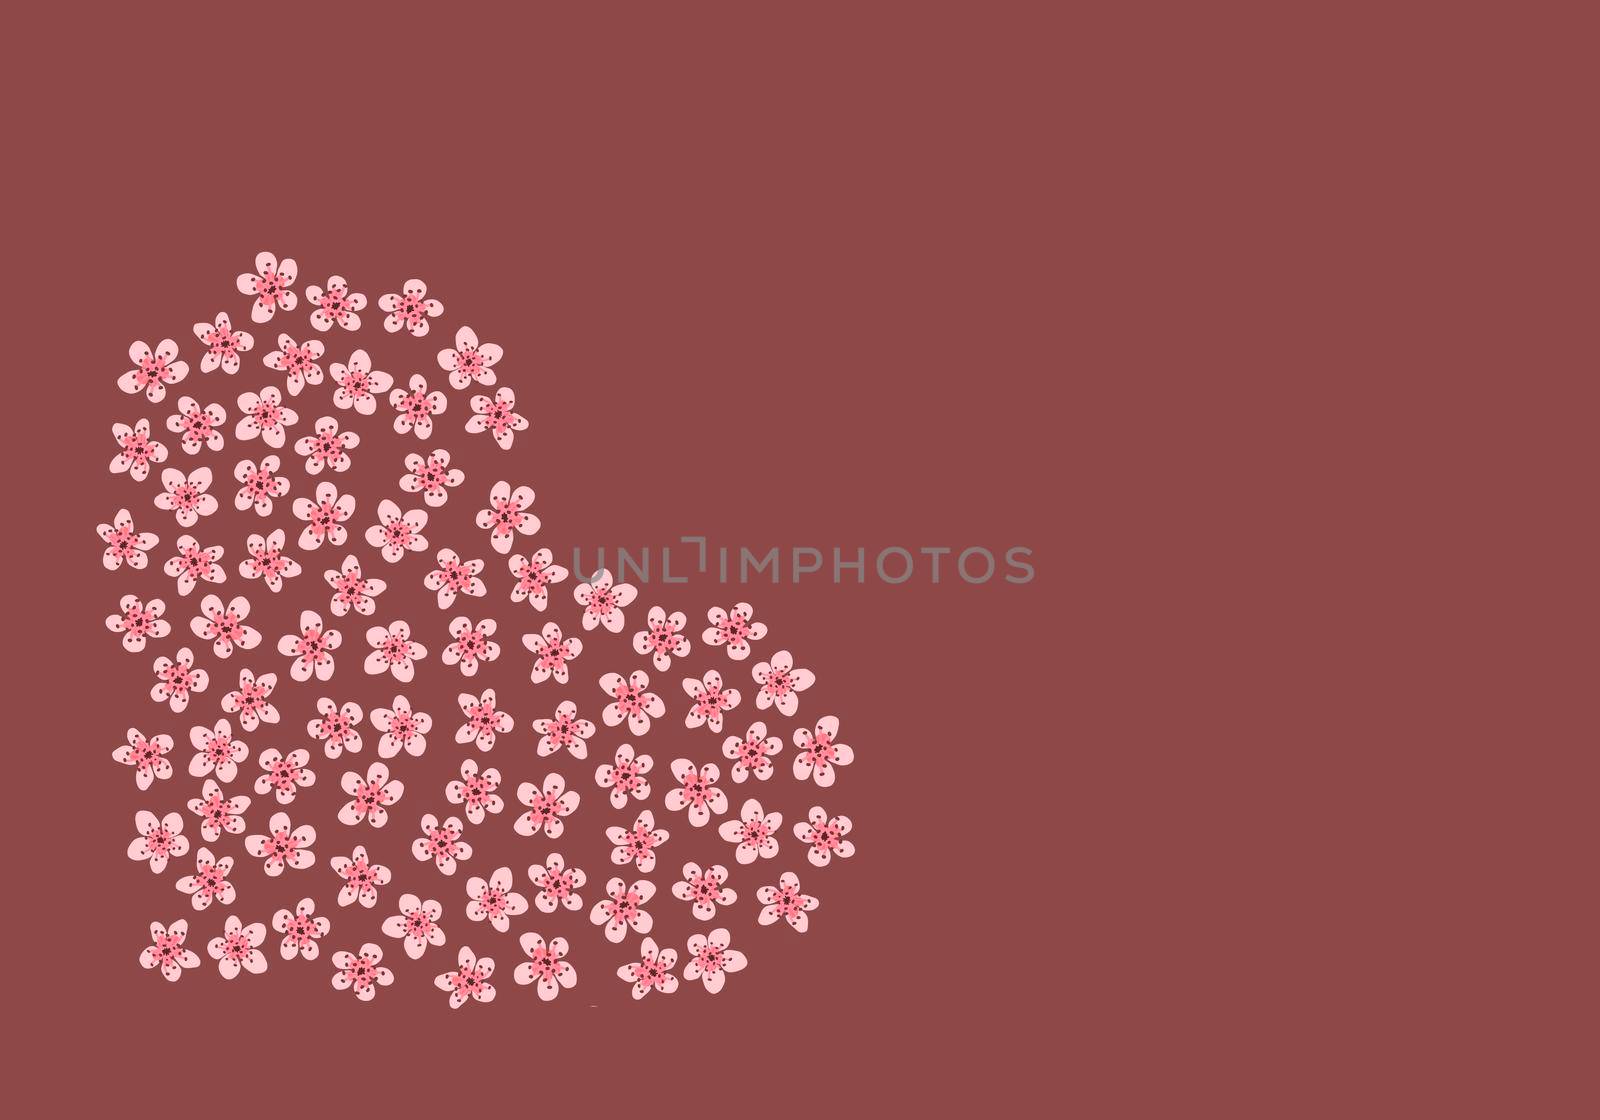 Modern Business card Design Template with heart made of pink sakura flowers decoration on cofee background. Template of premium gift voucher, discount coupon, Greeting card, packing. Copy space text